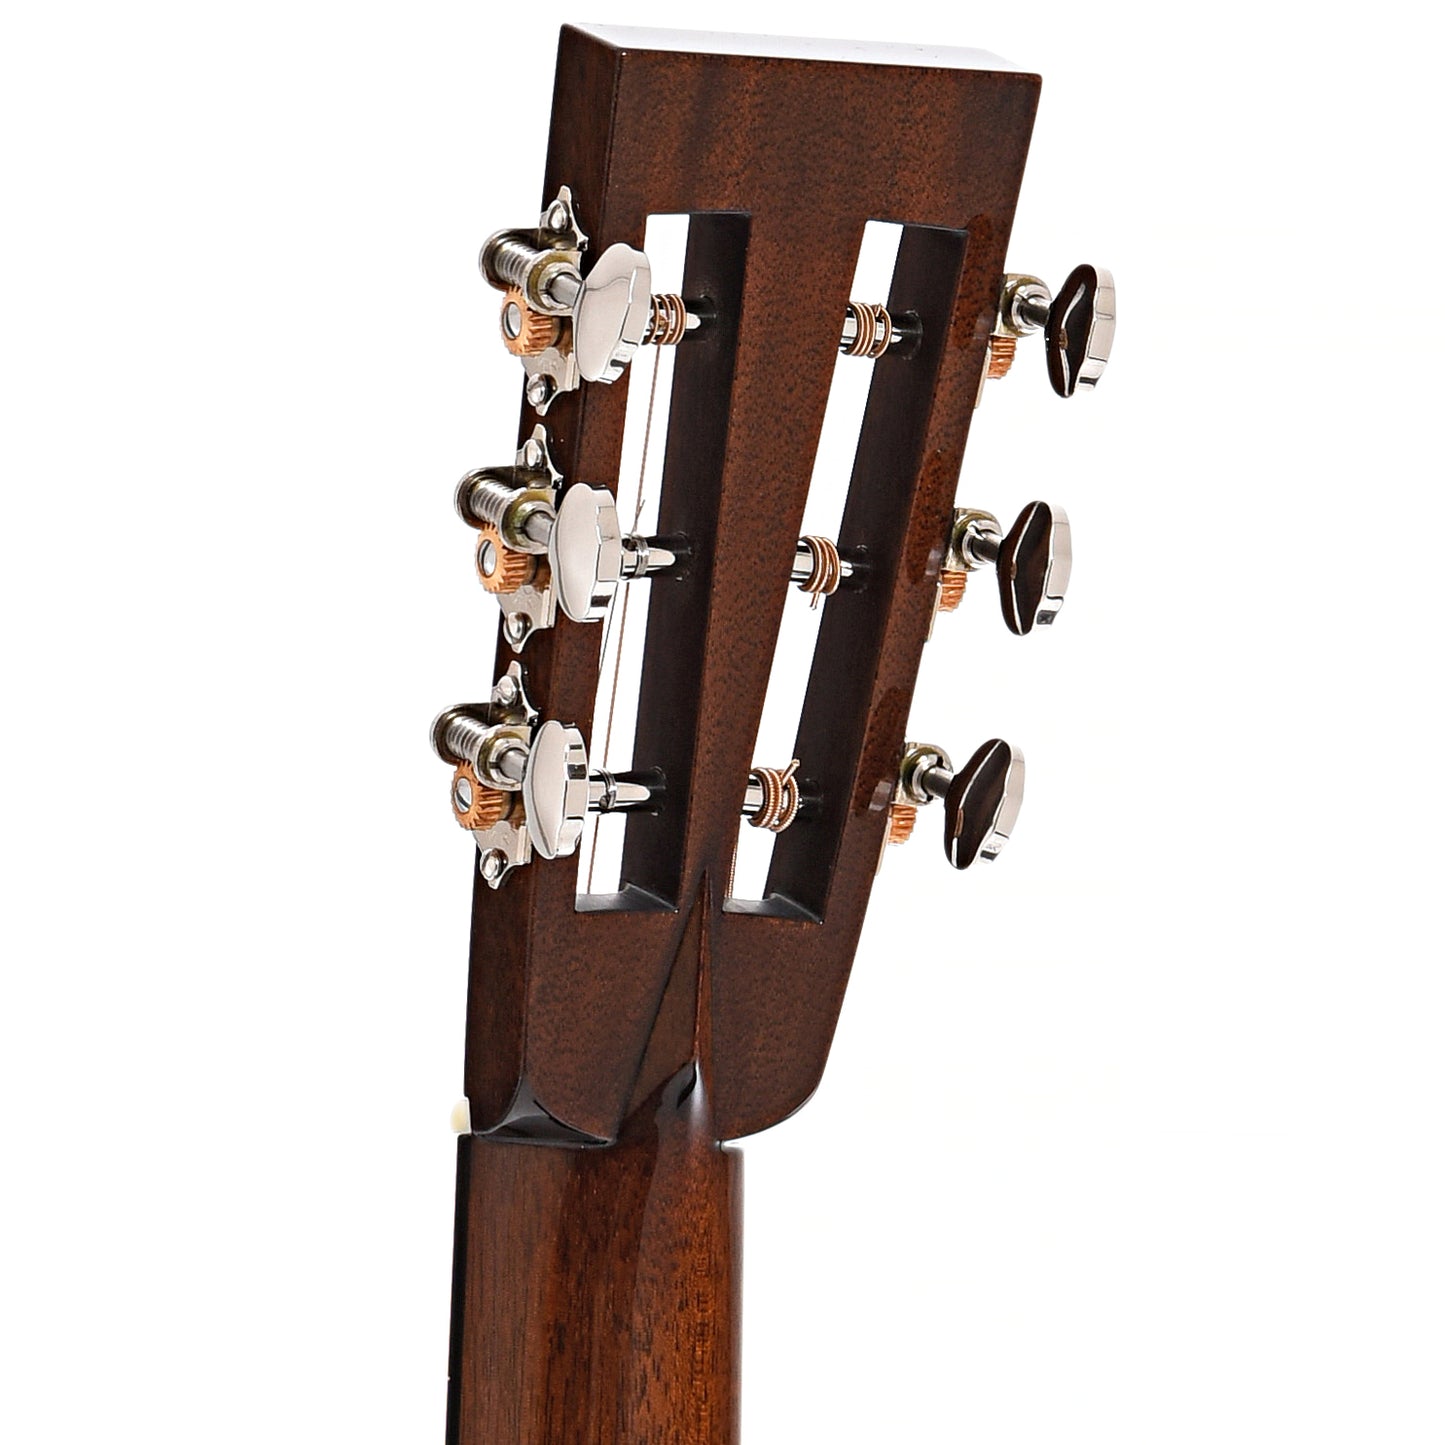 Back headstock of Collings 002H 12-Fret Acoustic Guitar